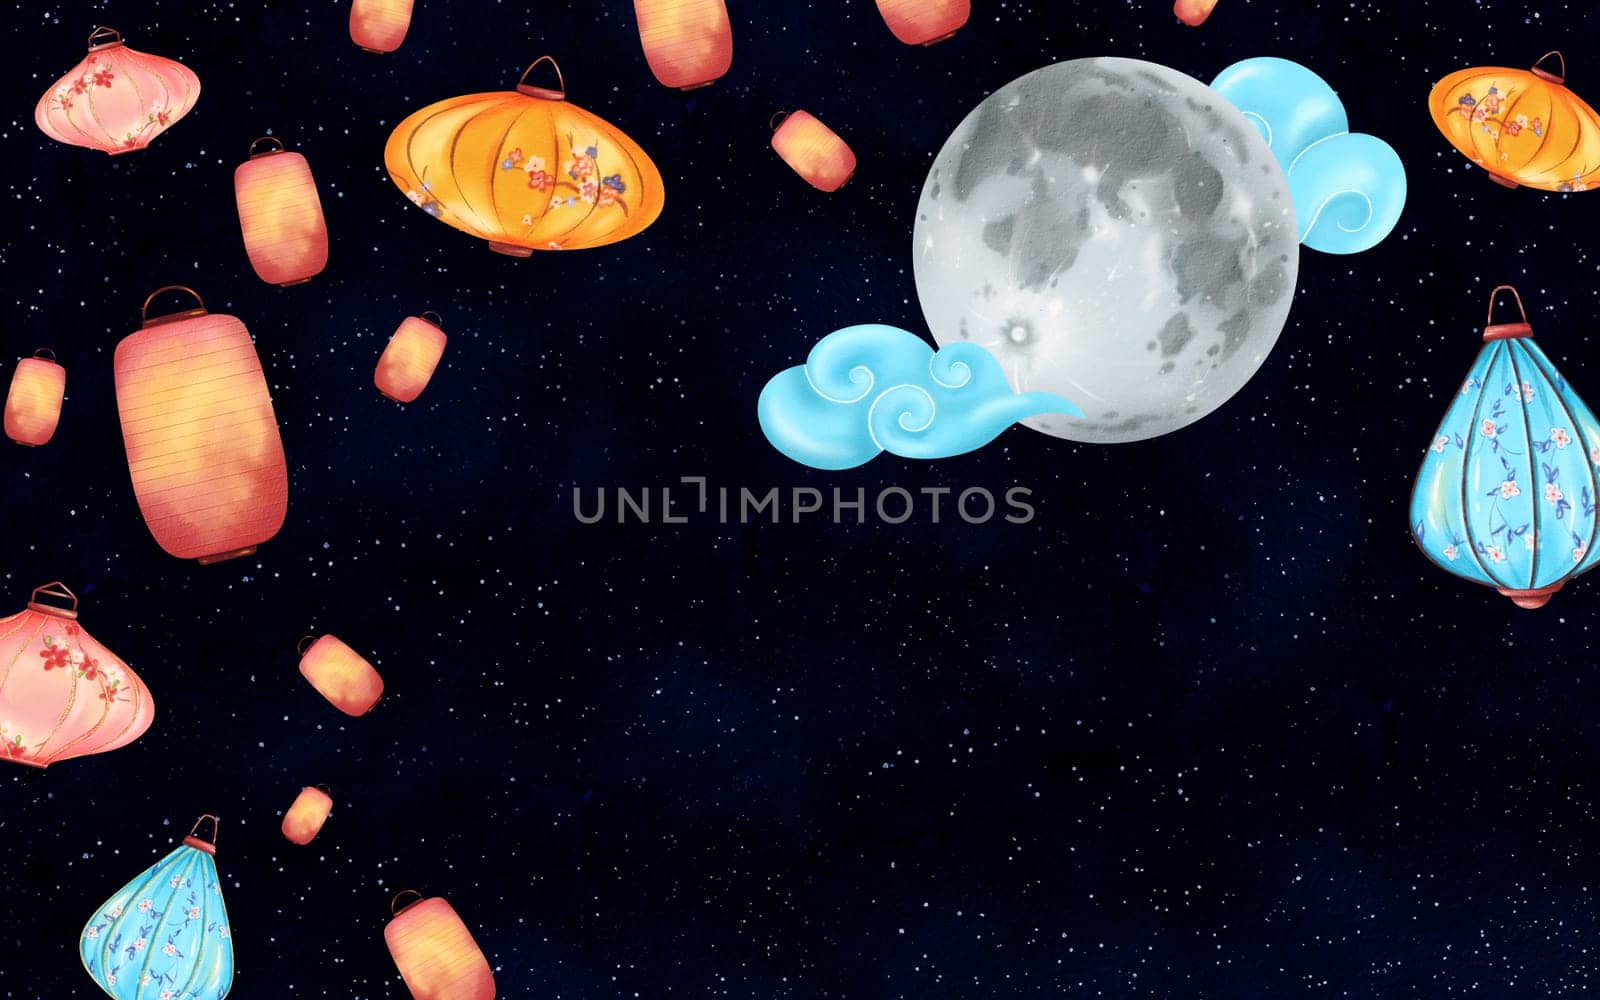 Starry night backdrop with moon and clouds, perfect for celebrating Chinese New Year or Lantern Festival. Assorted lanterns of different shapes, colors, and sizes. Watercolor illustration. by Art_Mari_Ka